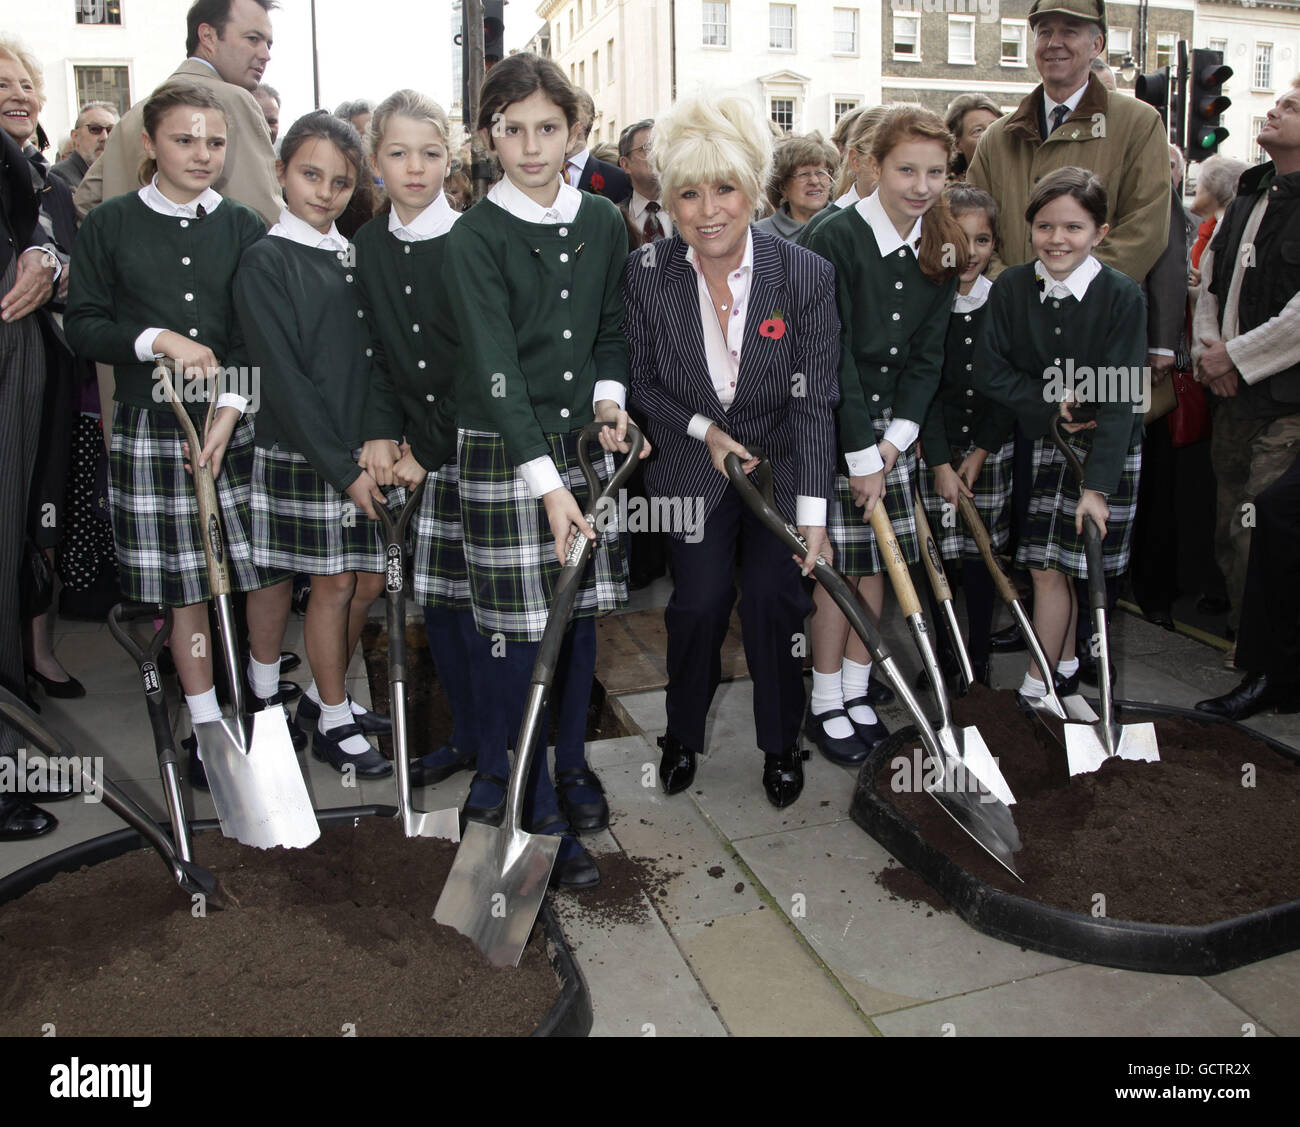 Barbara Windsor is joined by pupils from Queens College Prep School during the unveiling of the central London tree planting scheme in Marylebone, central London. PRESS ASSOCIATION Photo. Picture date: Thursday November 4, 2010. The event is part of a joint initiative between Westminster City Council, Westminster Tree Trust and the W1W Tree Planting Initiative. Photo credit should read: Yui Mok/PA Wire Stock Photo